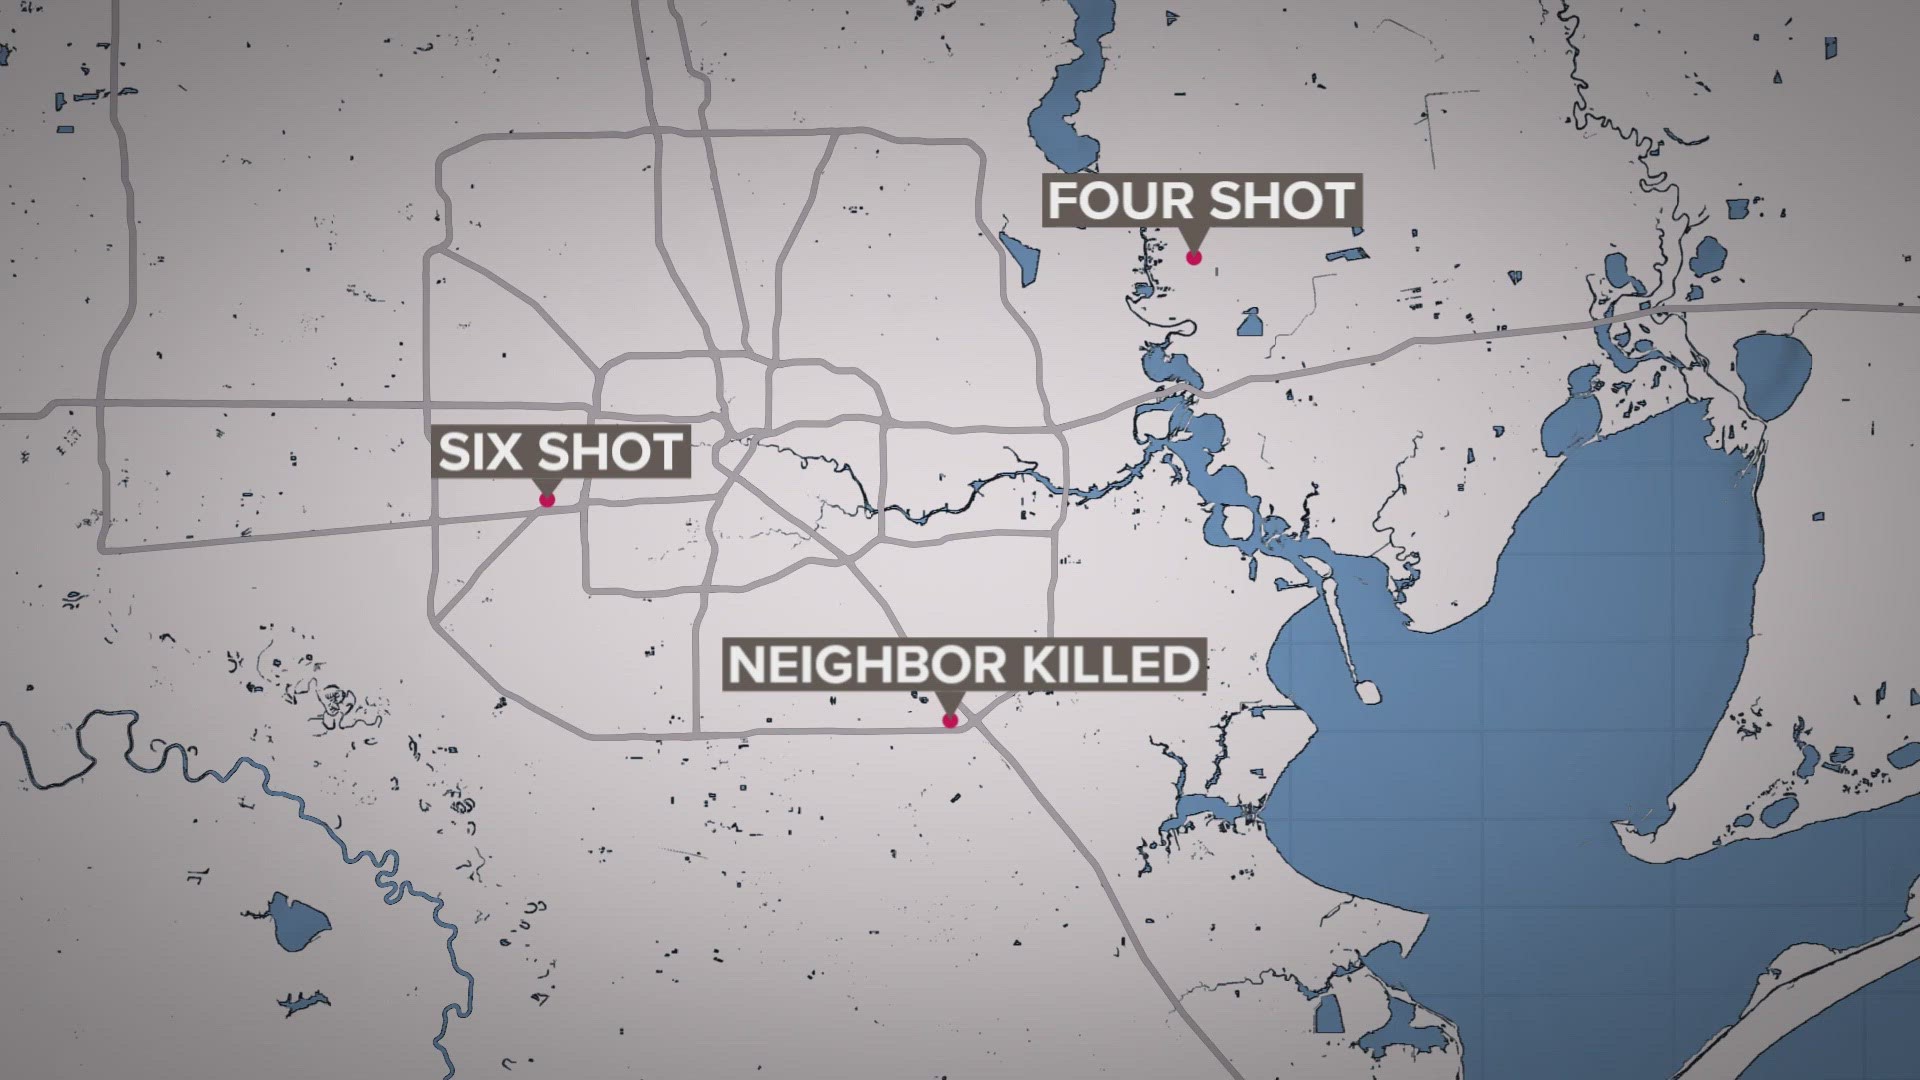 Authorities in the Houston area are investigating several major shootings that all took place on Sunday.